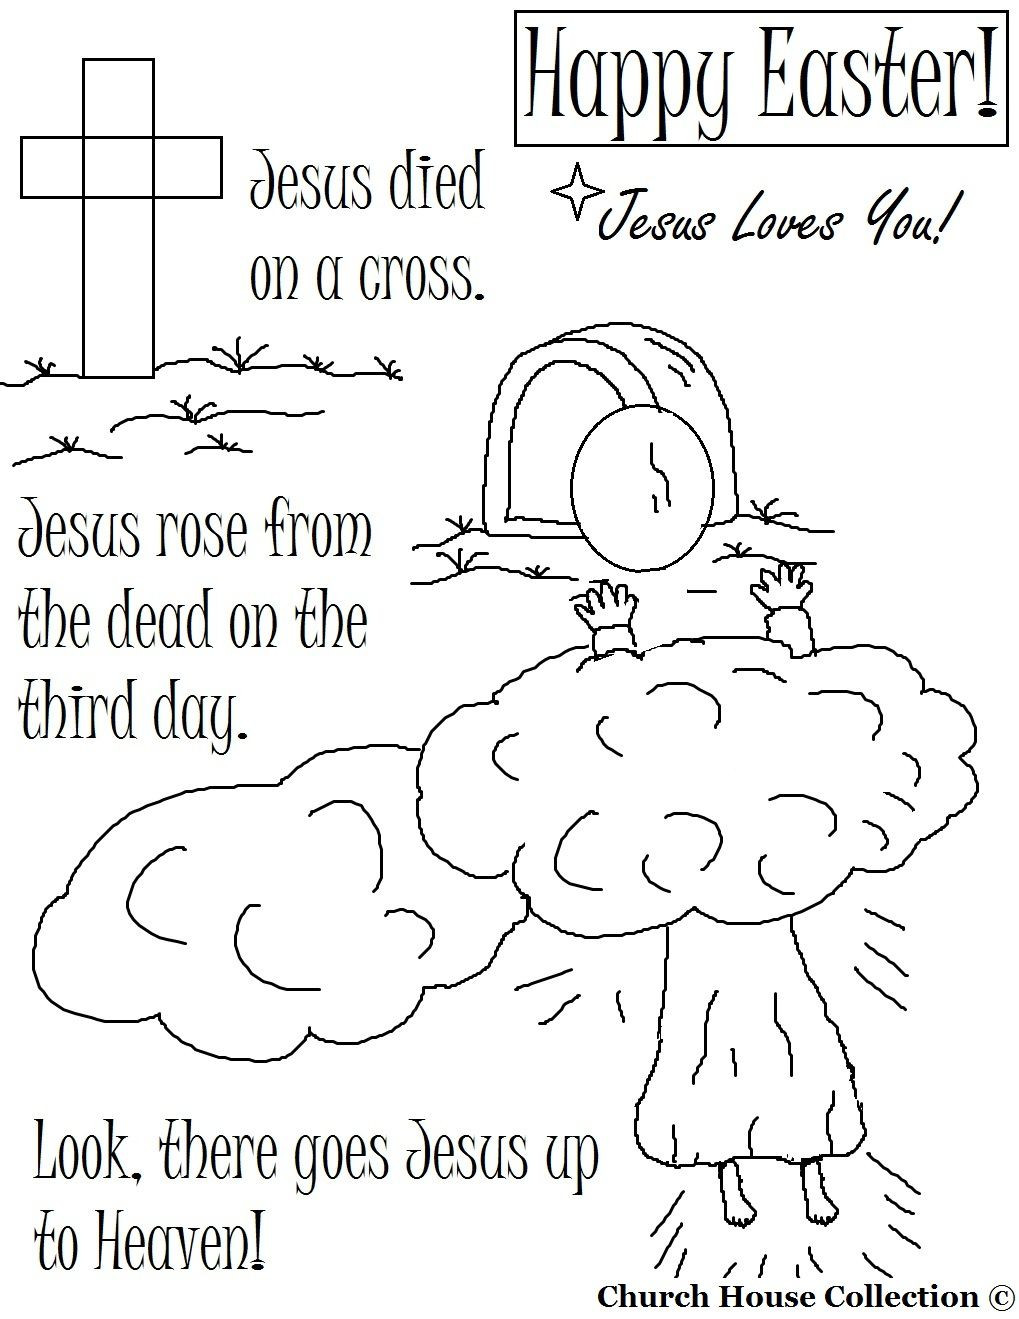 Christian Coloring Pages For Toddlers
 Pin by Melissa Rieckenberg Clark on Easter